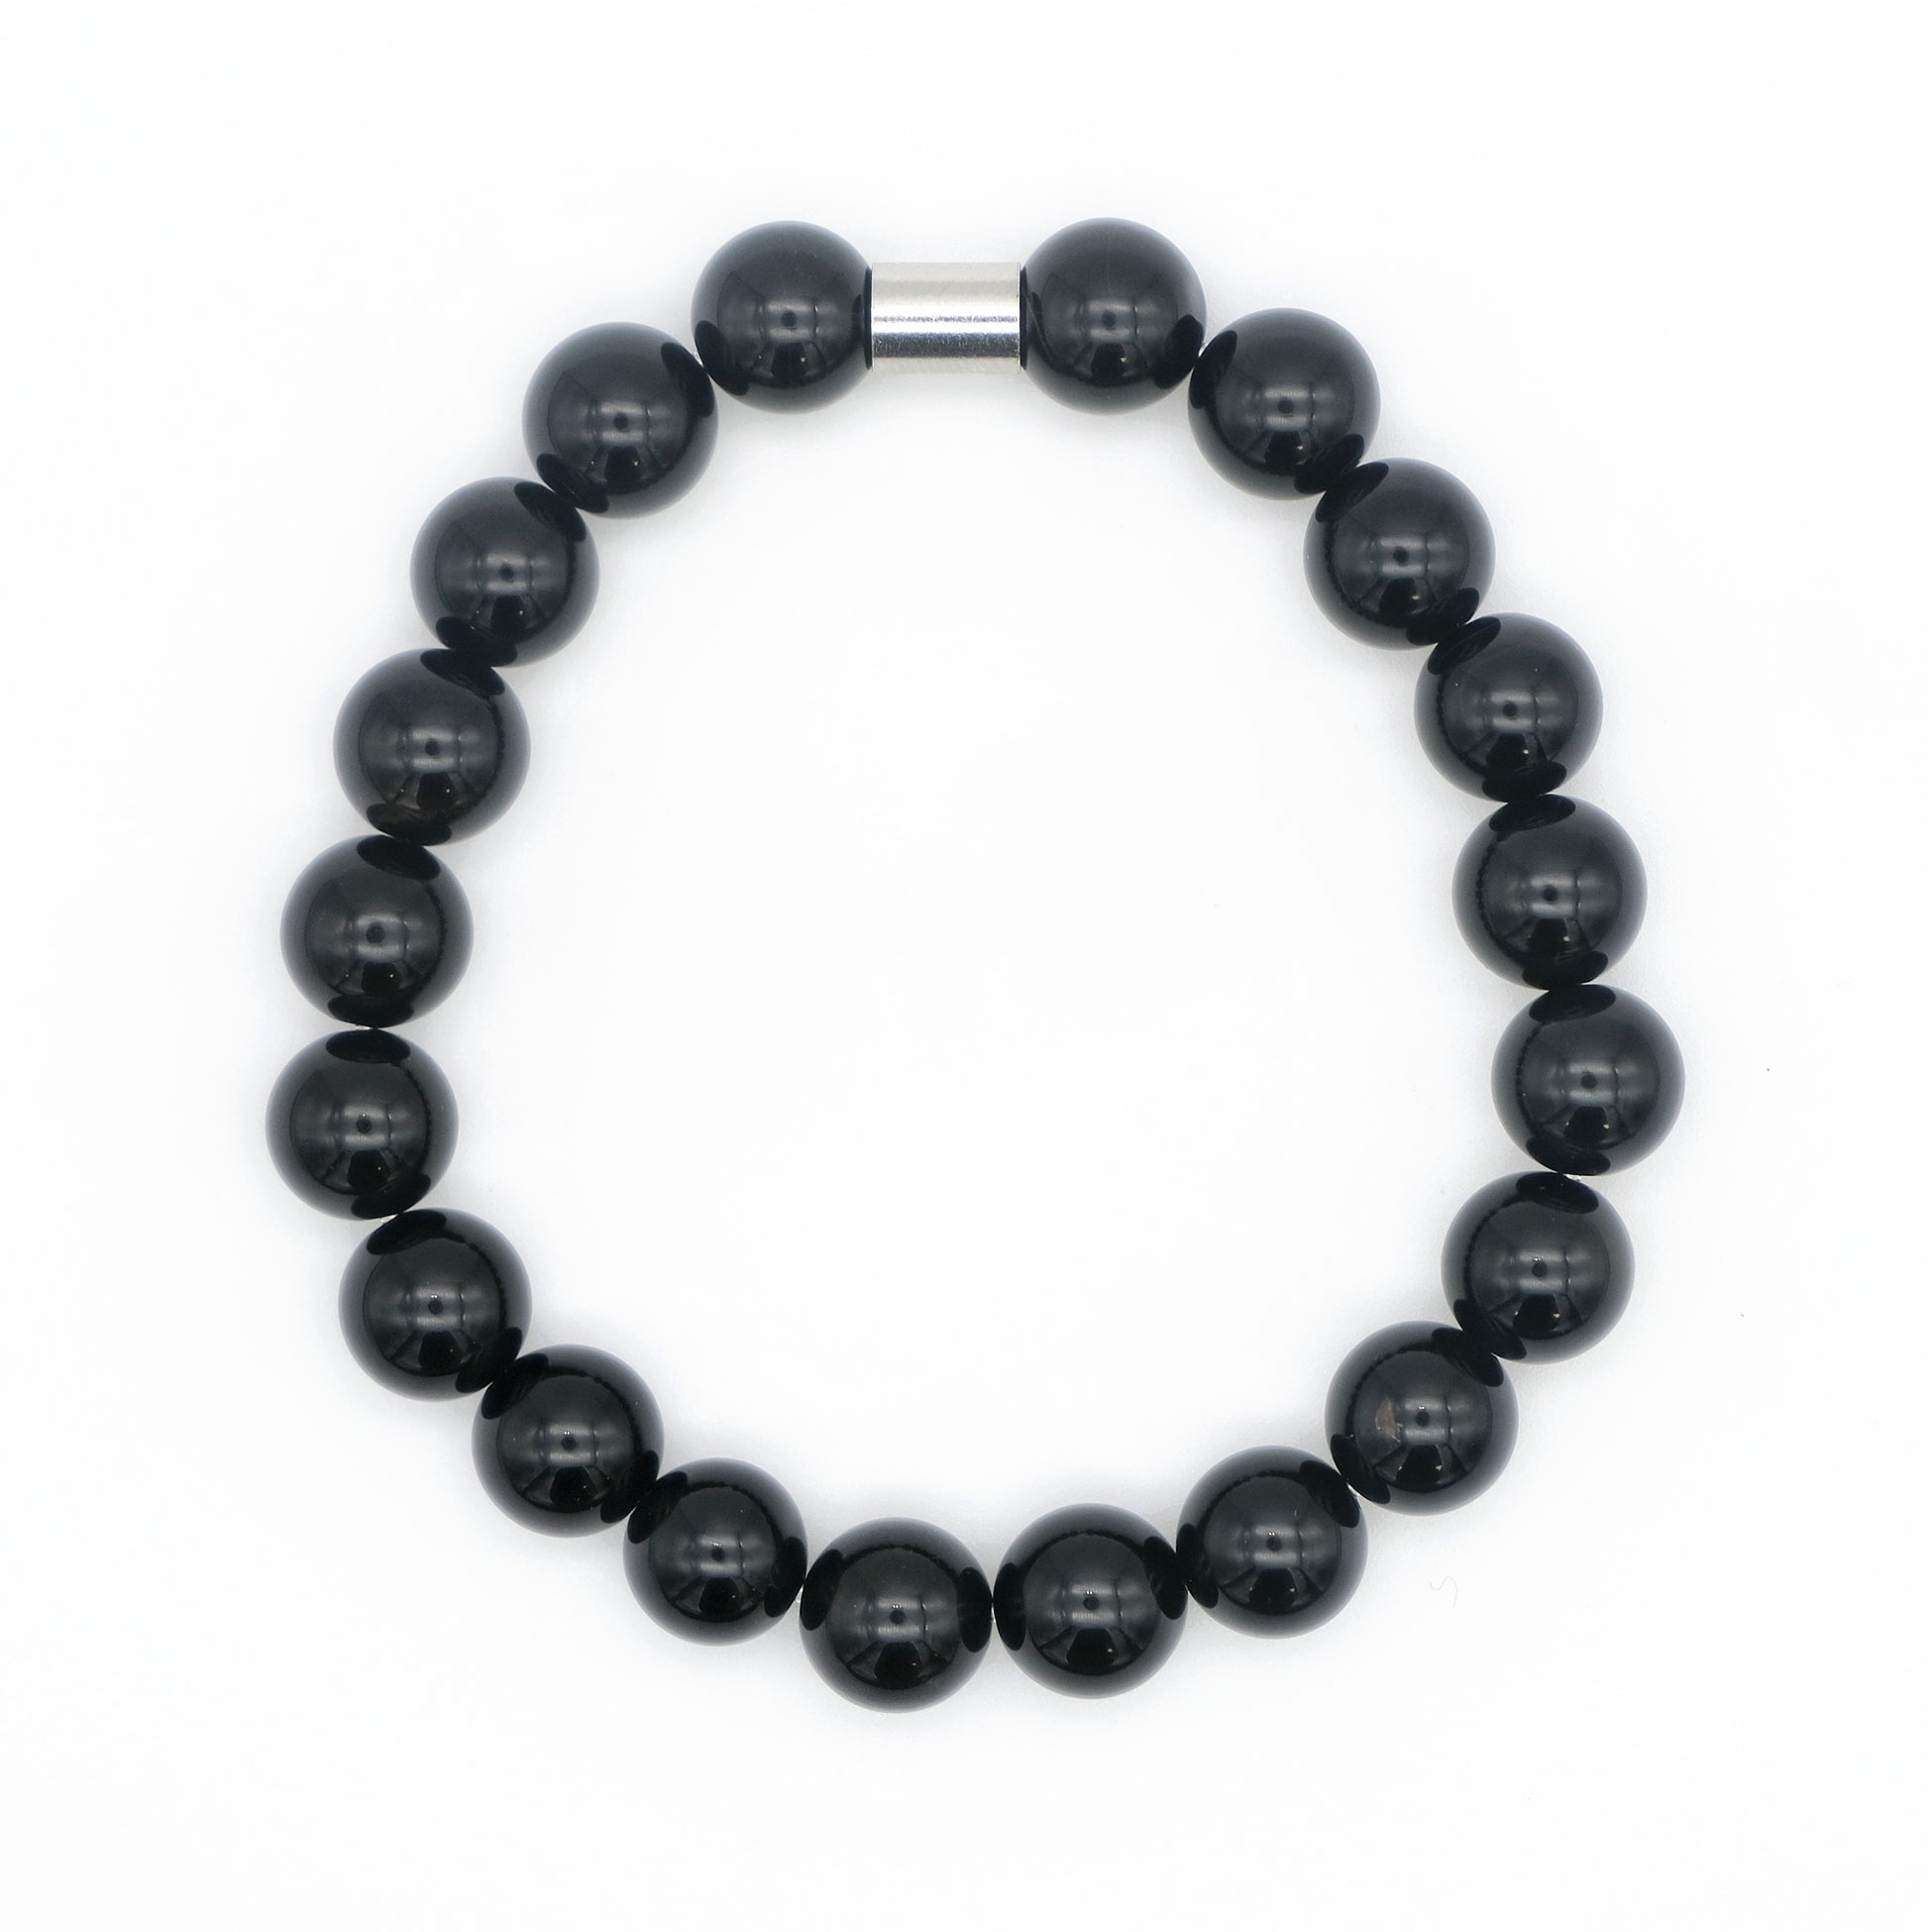 onyx gemstone bracelet in 10mm beads with stainless steel accessory from above